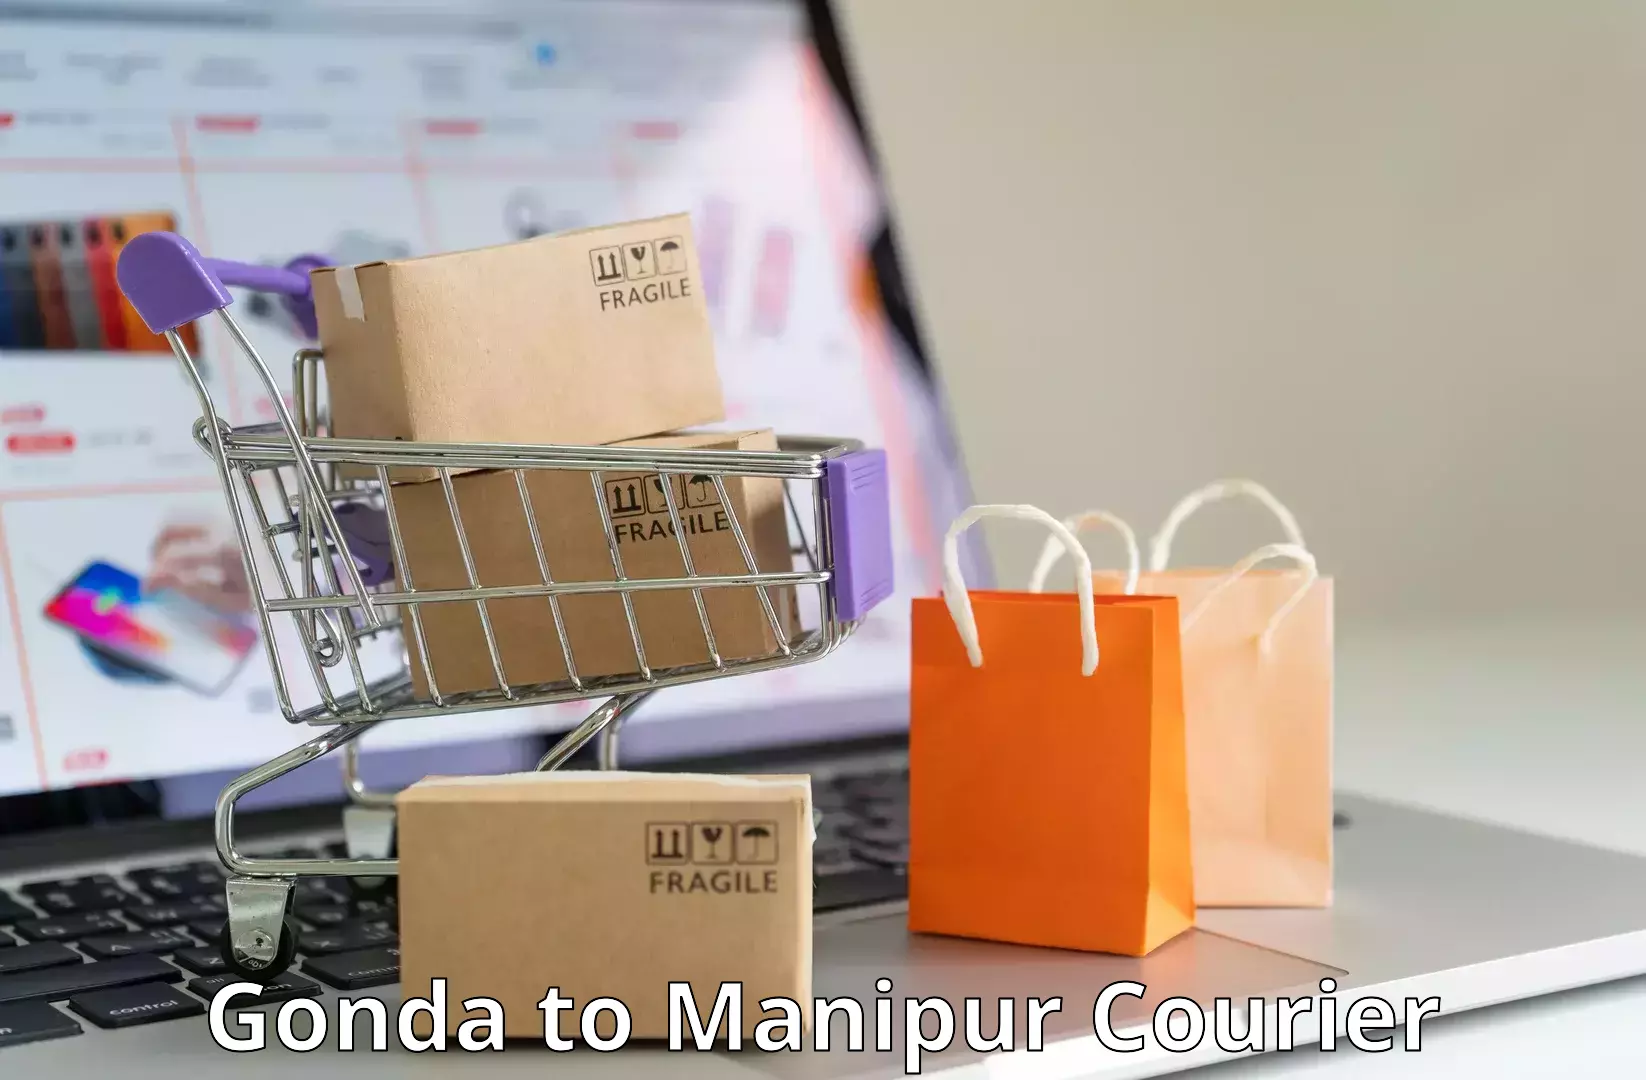 User-friendly delivery service Gonda to Manipur